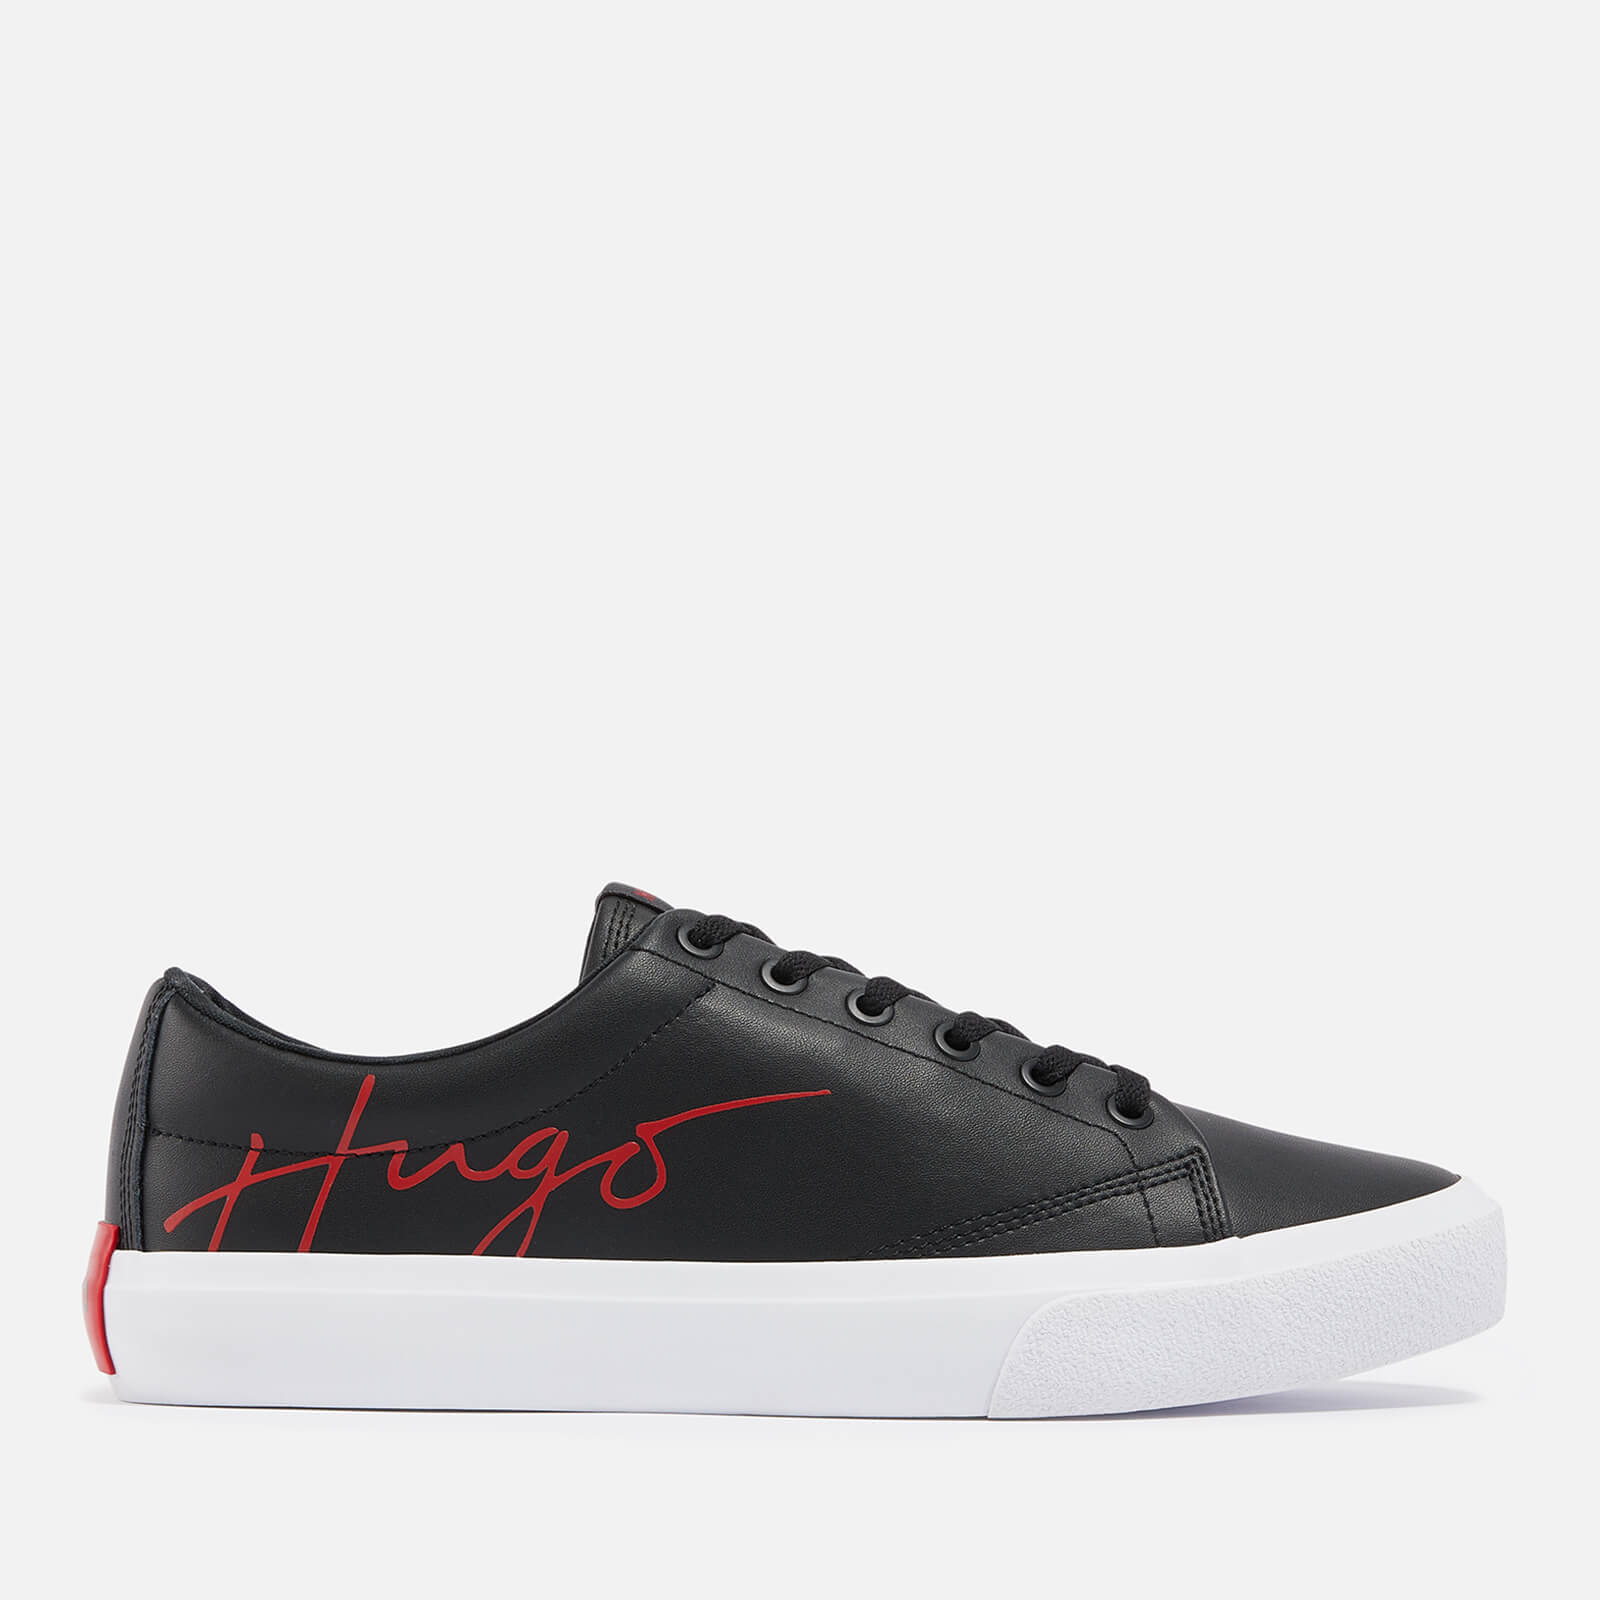 HUGO Men's Dyer H Leather Tennis Trainers - UK 8